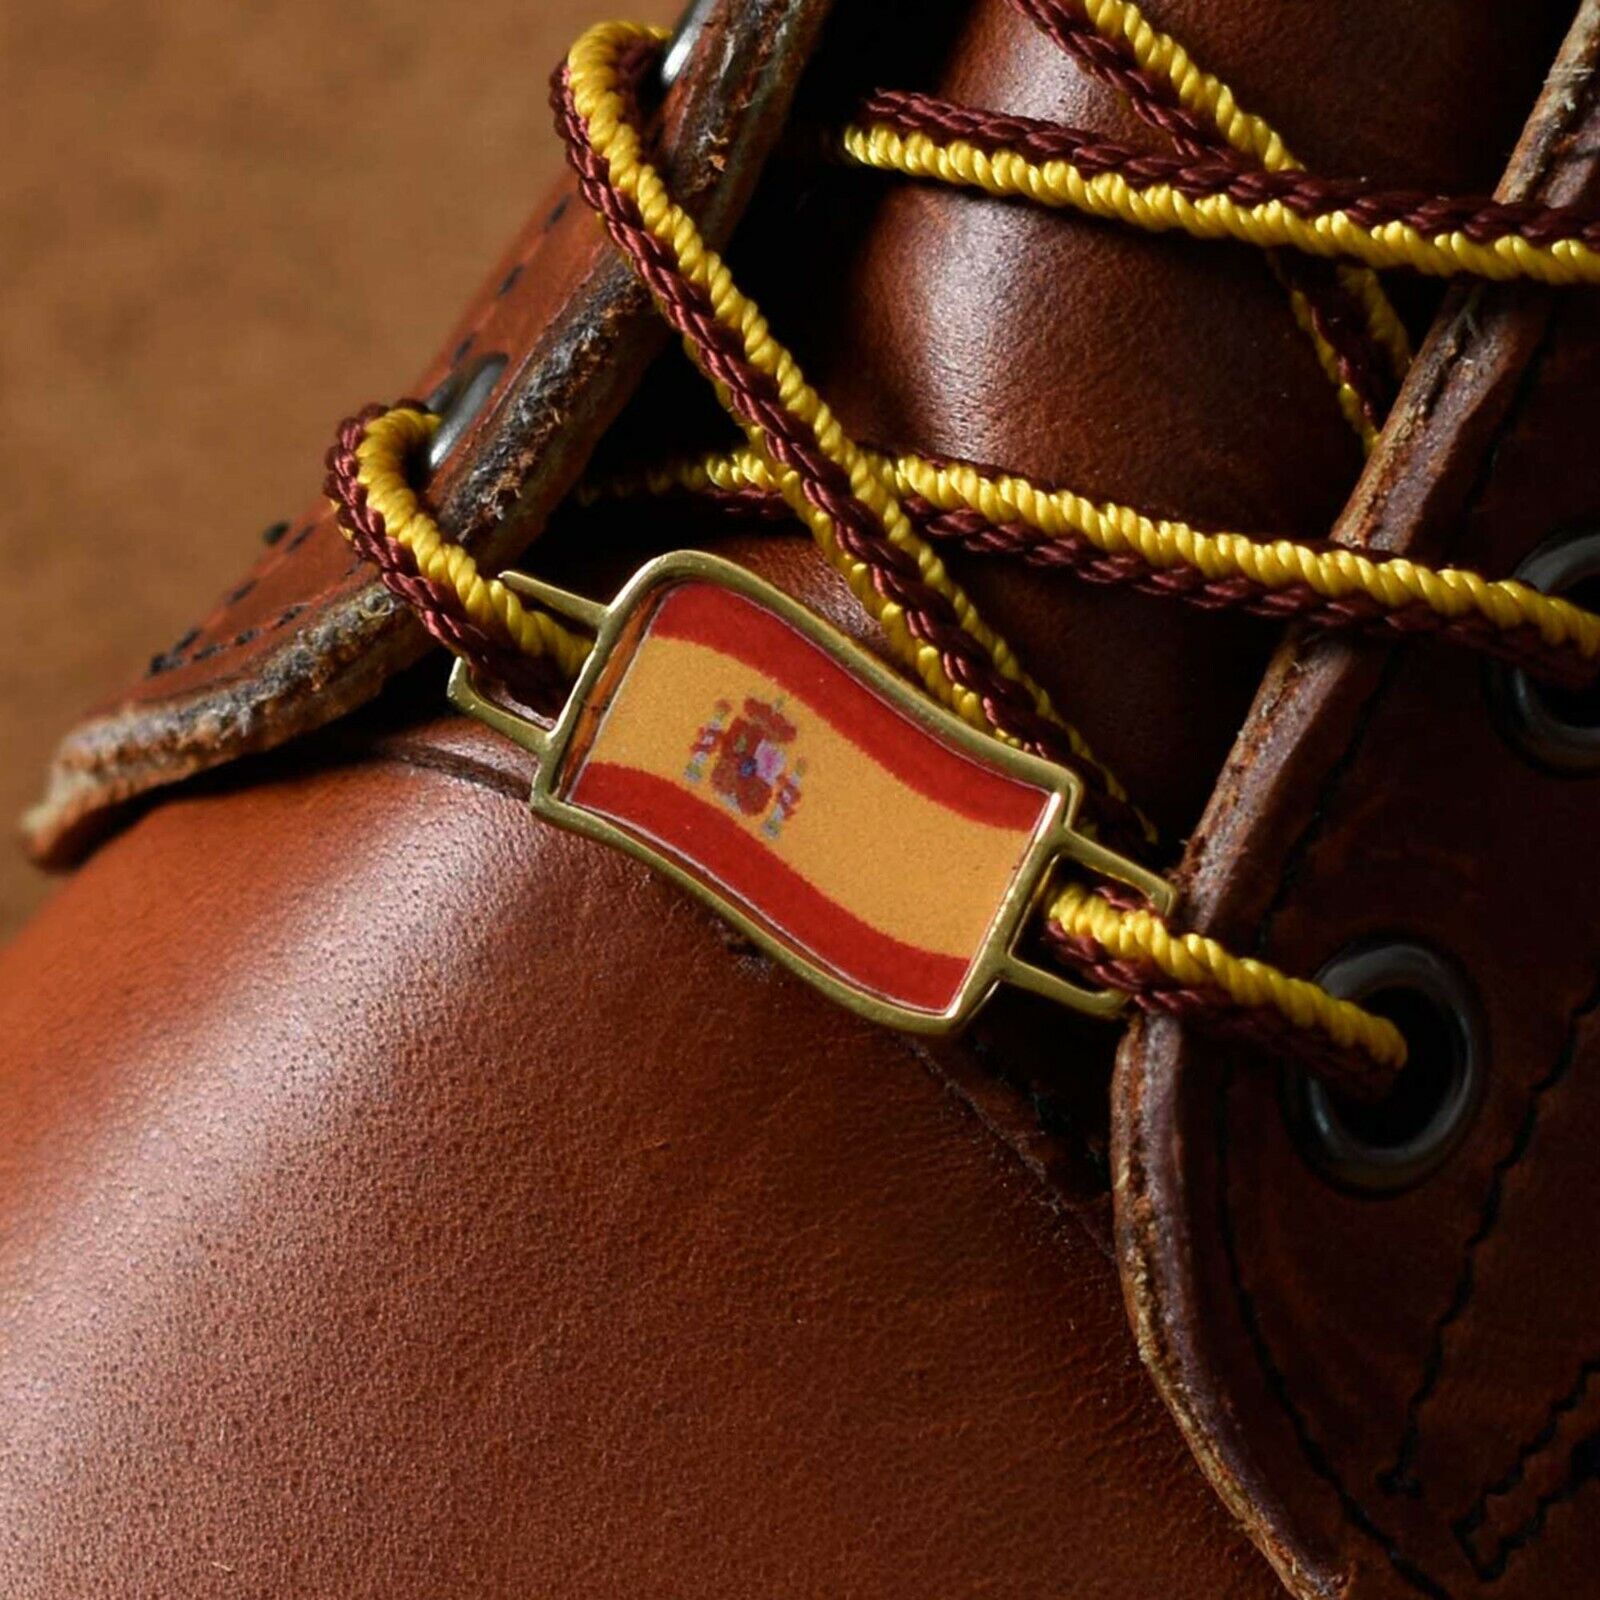 Spain Flags Shoes Boot Shoelace Keeper Holder Charm BrooklynMaker